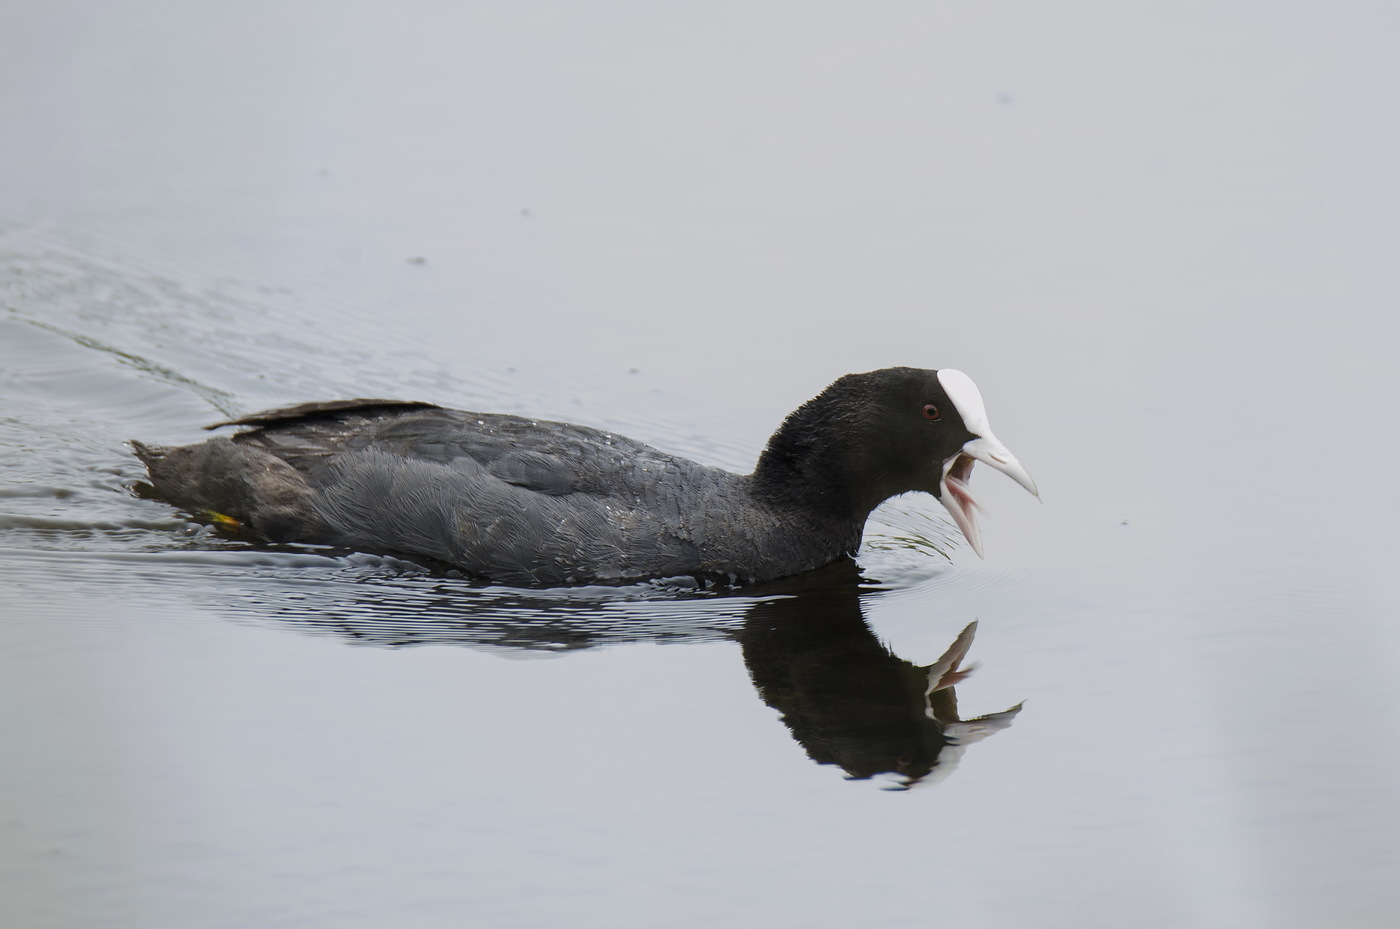 Adult coot shout signals chicks about danger